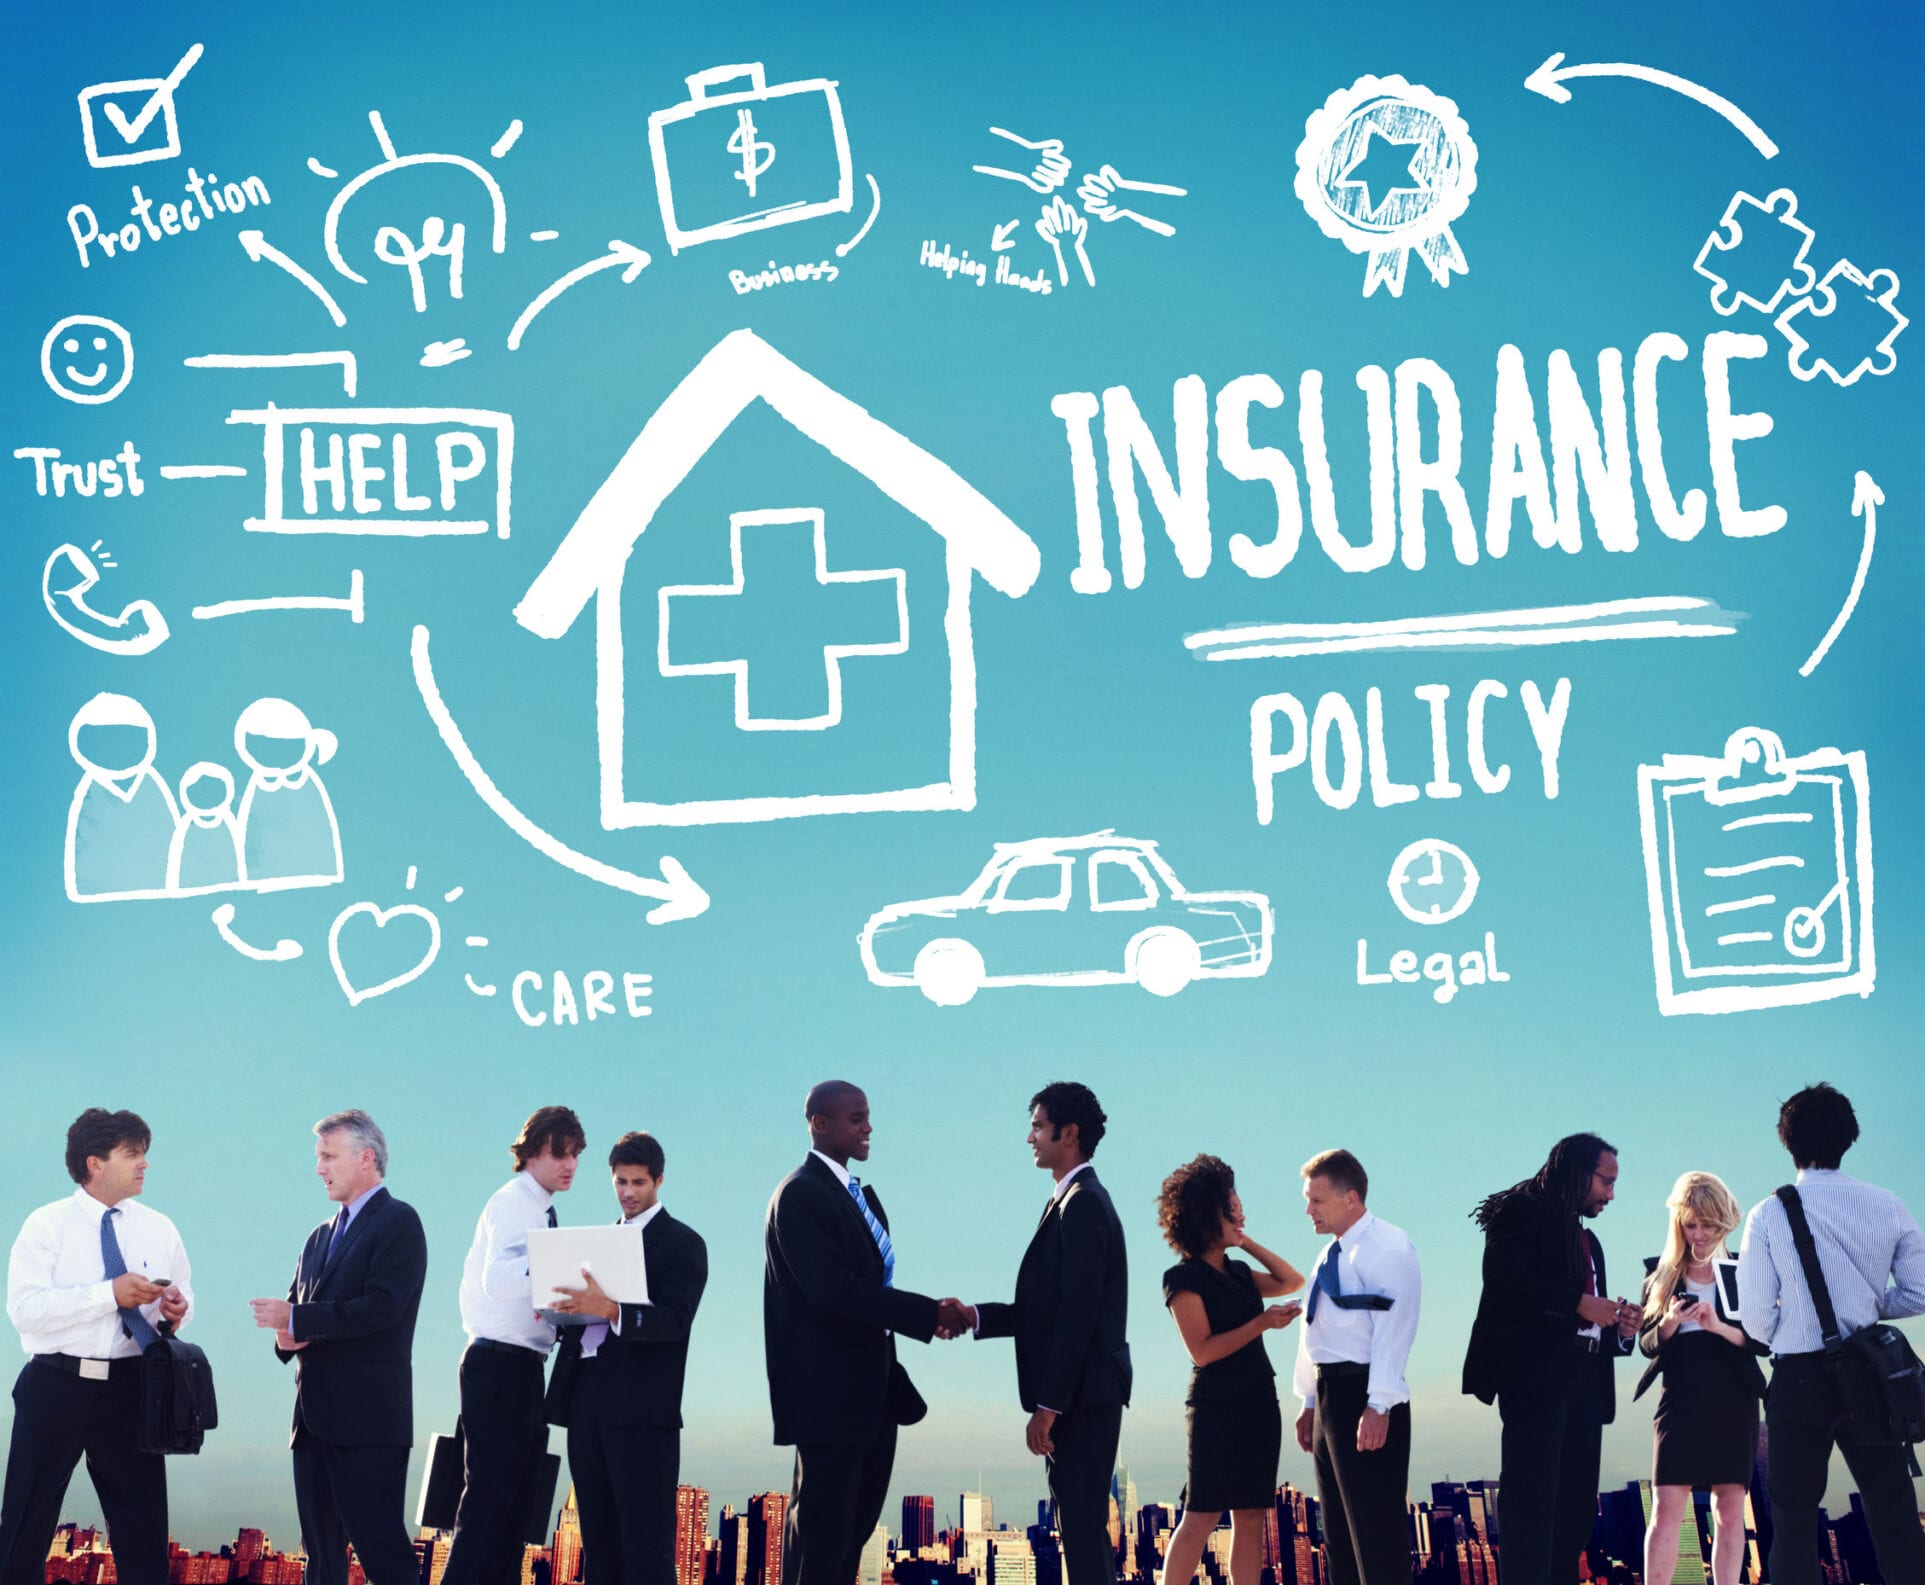 Insurance Policy Help Legal Care Trust Protection Protection Con